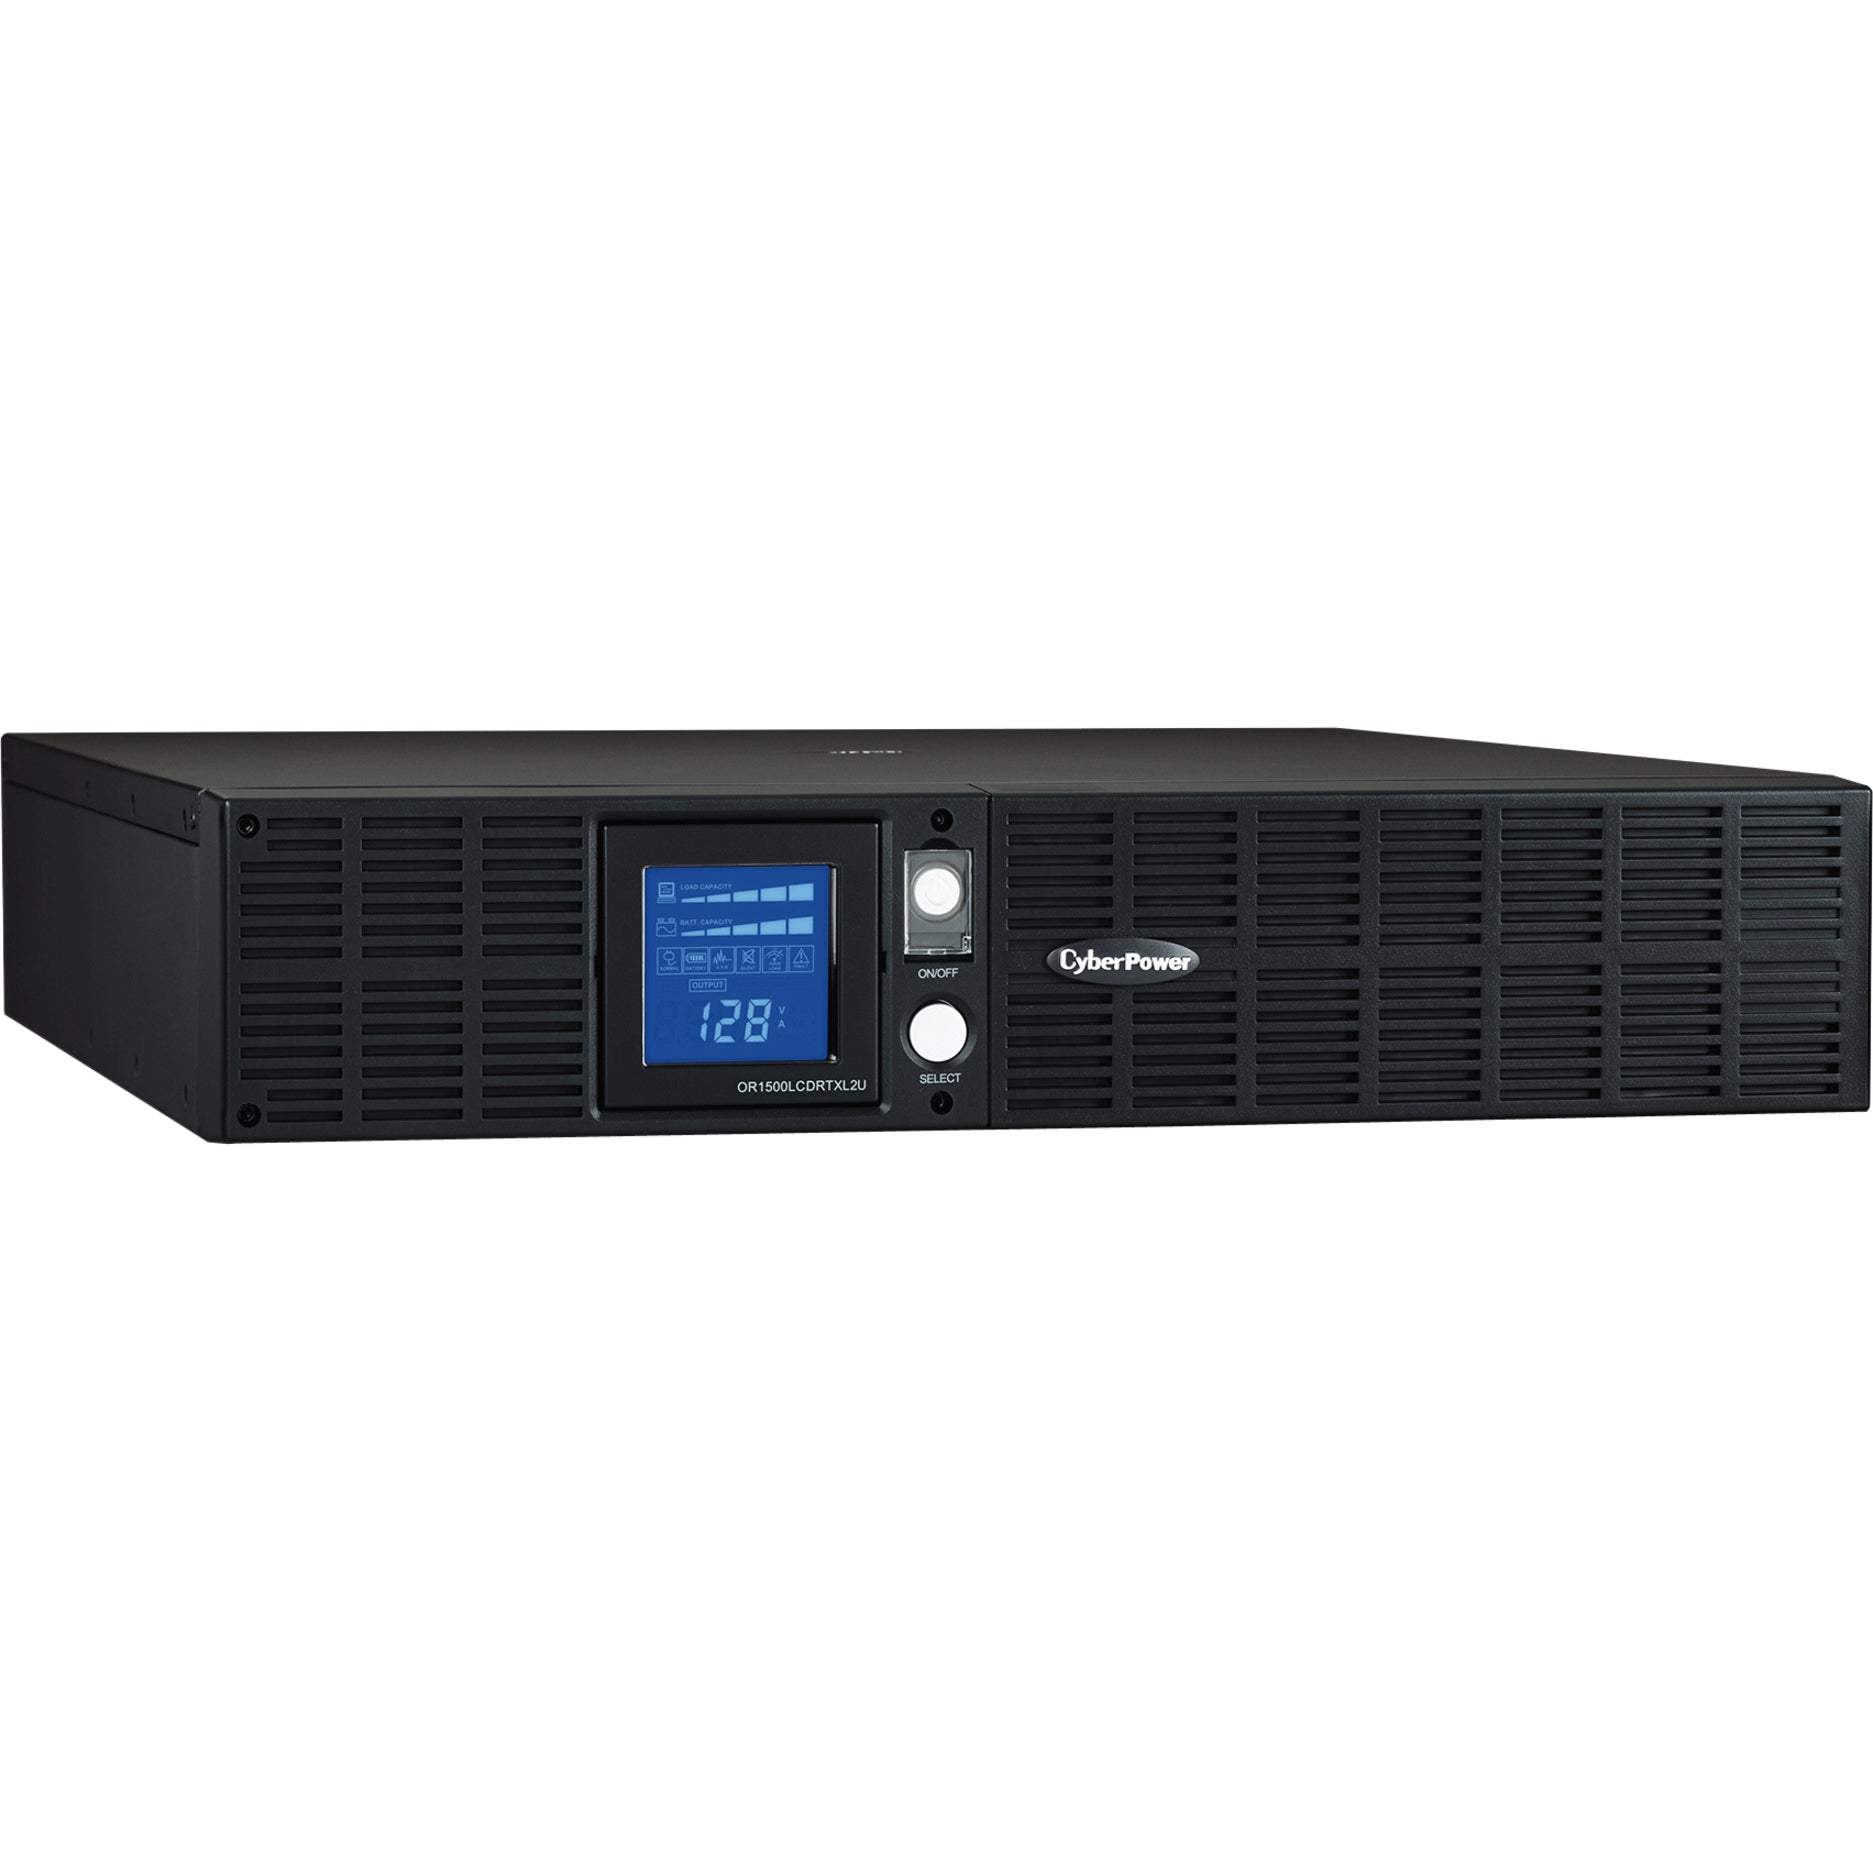 CyberPower OR1500LCDRTXL2U Smart App Intelligent LCD UPS, 1500 VA Tower/Rack-mountable, SNMP Manageable